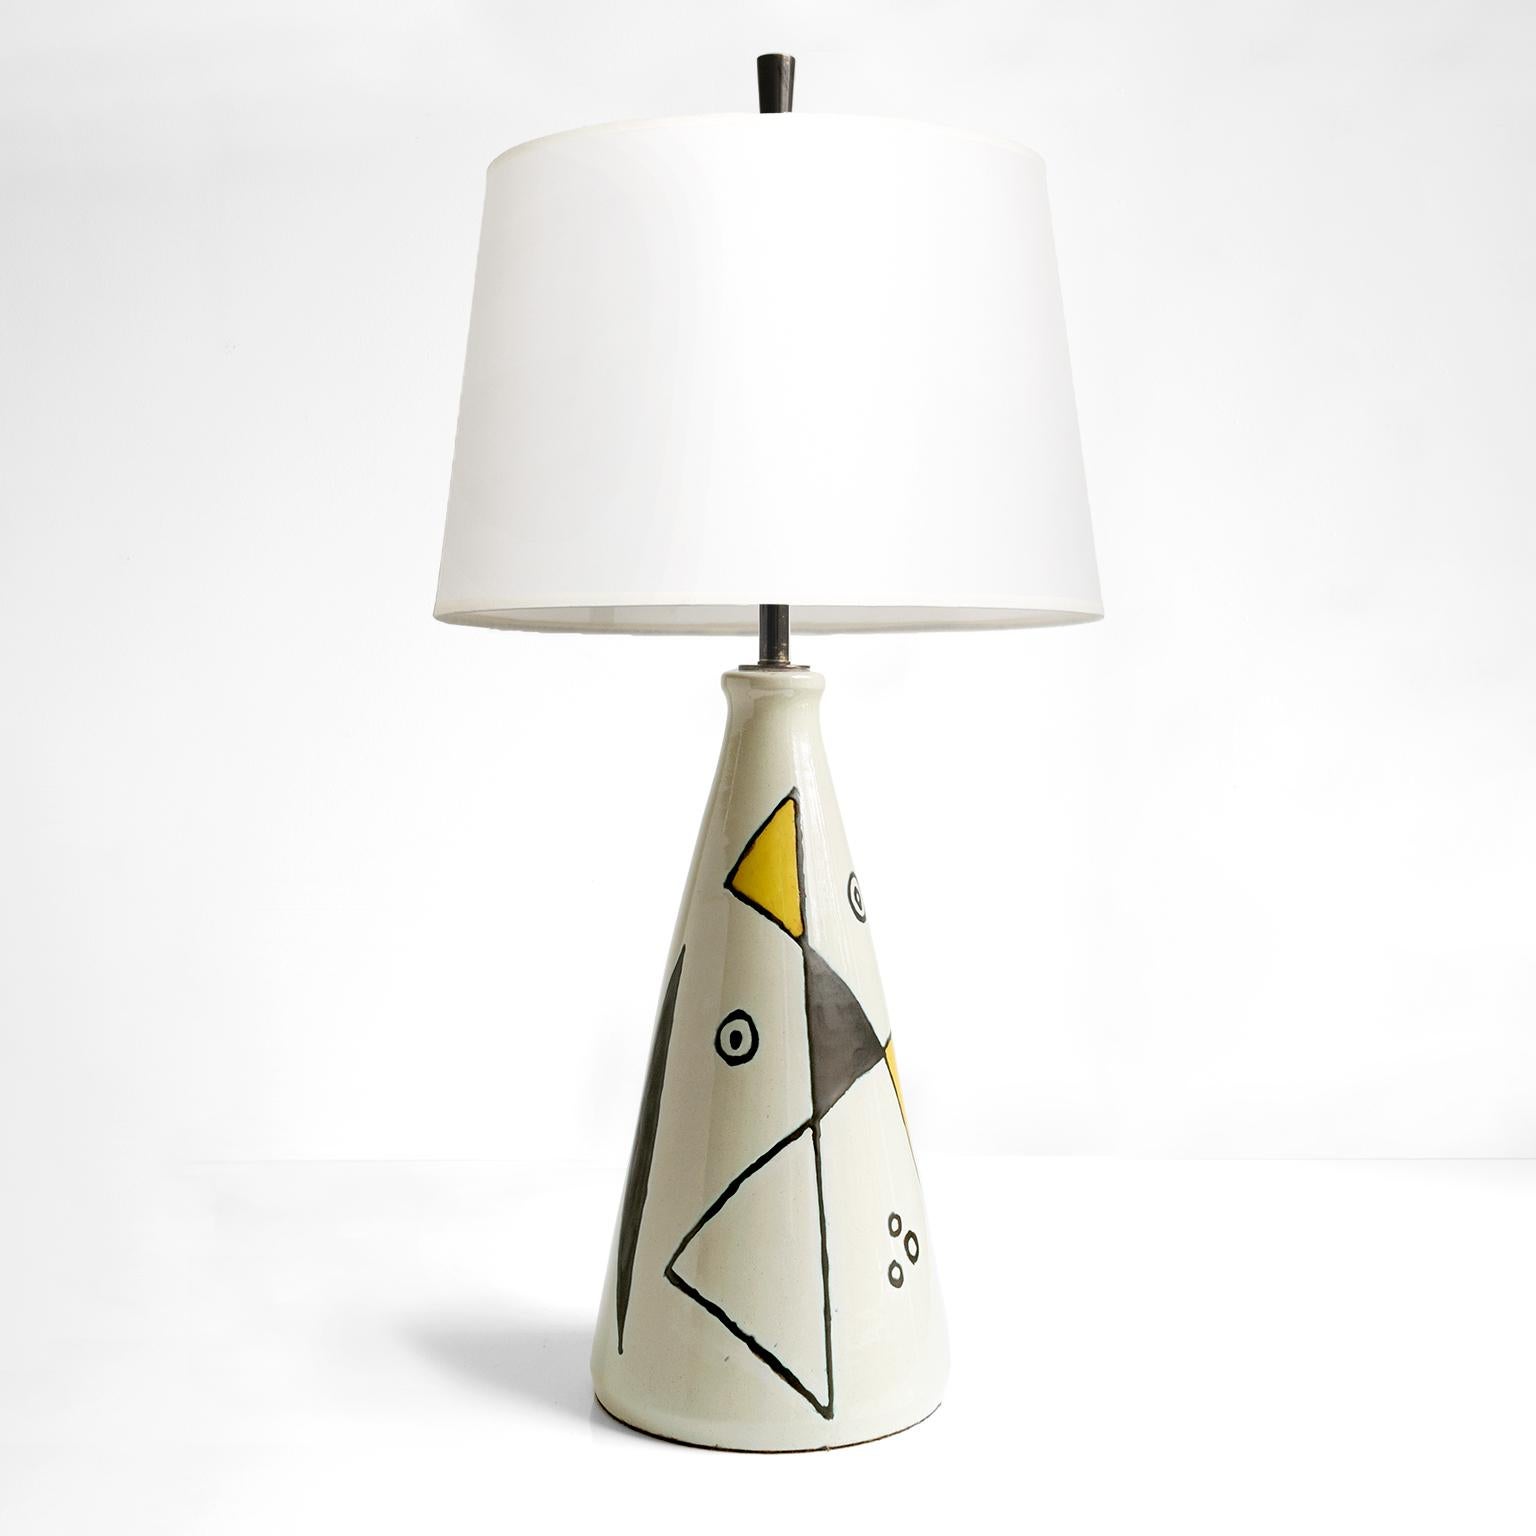 Axel Bruel, Scandinavian Modern glazed stoneware table lamp, Denmark. The lamp is decorated by Bruel in abstract shapes wrapped around a conical shaped body. Newly rewired with a patinated brass double cluster of edison base sockets. Finial is